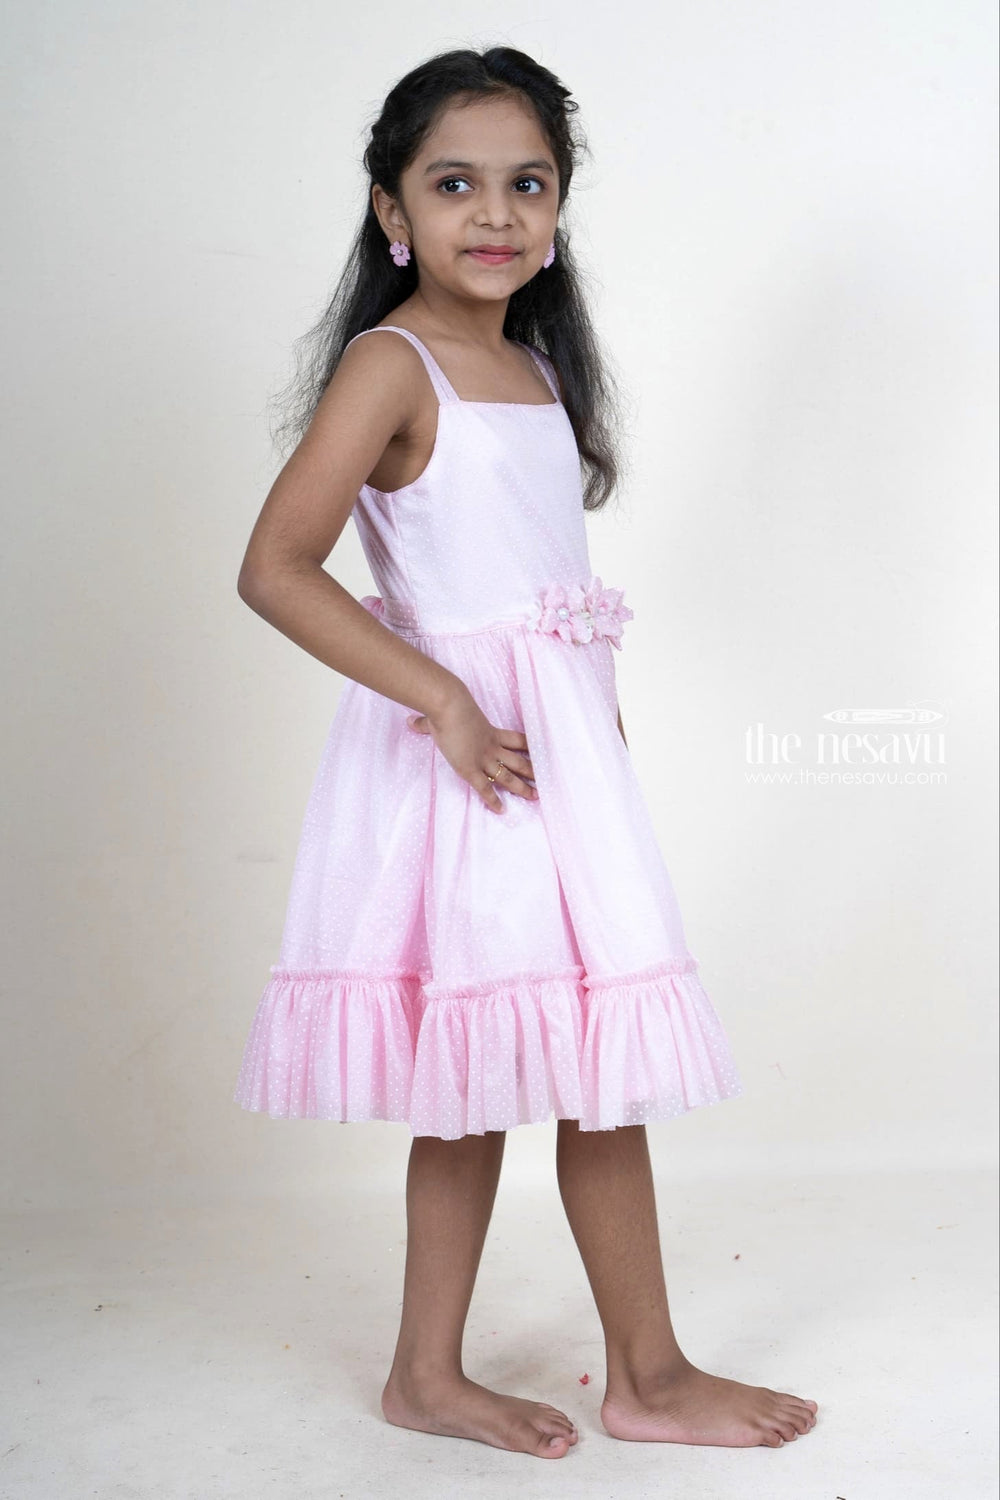 The Nesavu Girls Fancy Party Frock pink self patterned sleeveless party gown with floral embellishments for girls Nesavu